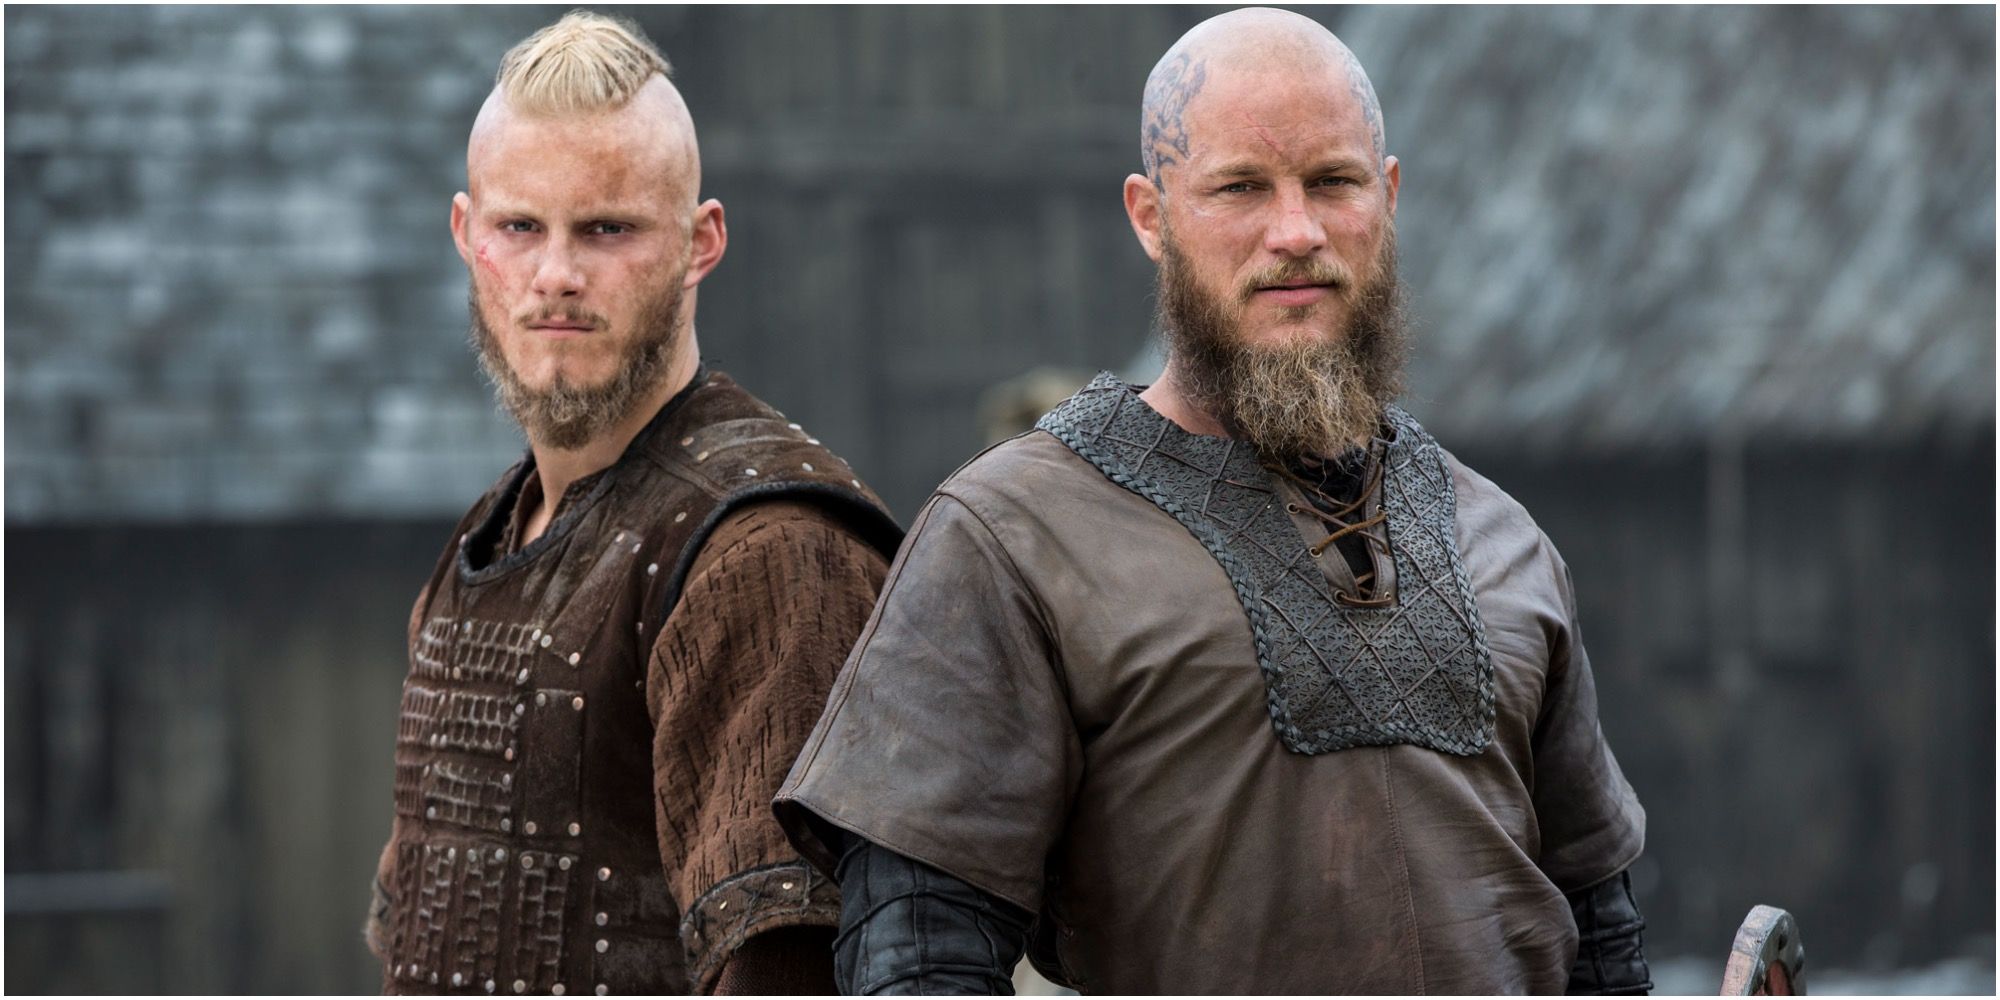 Photo of Bjorn and Ragnar from TV Series Vikings